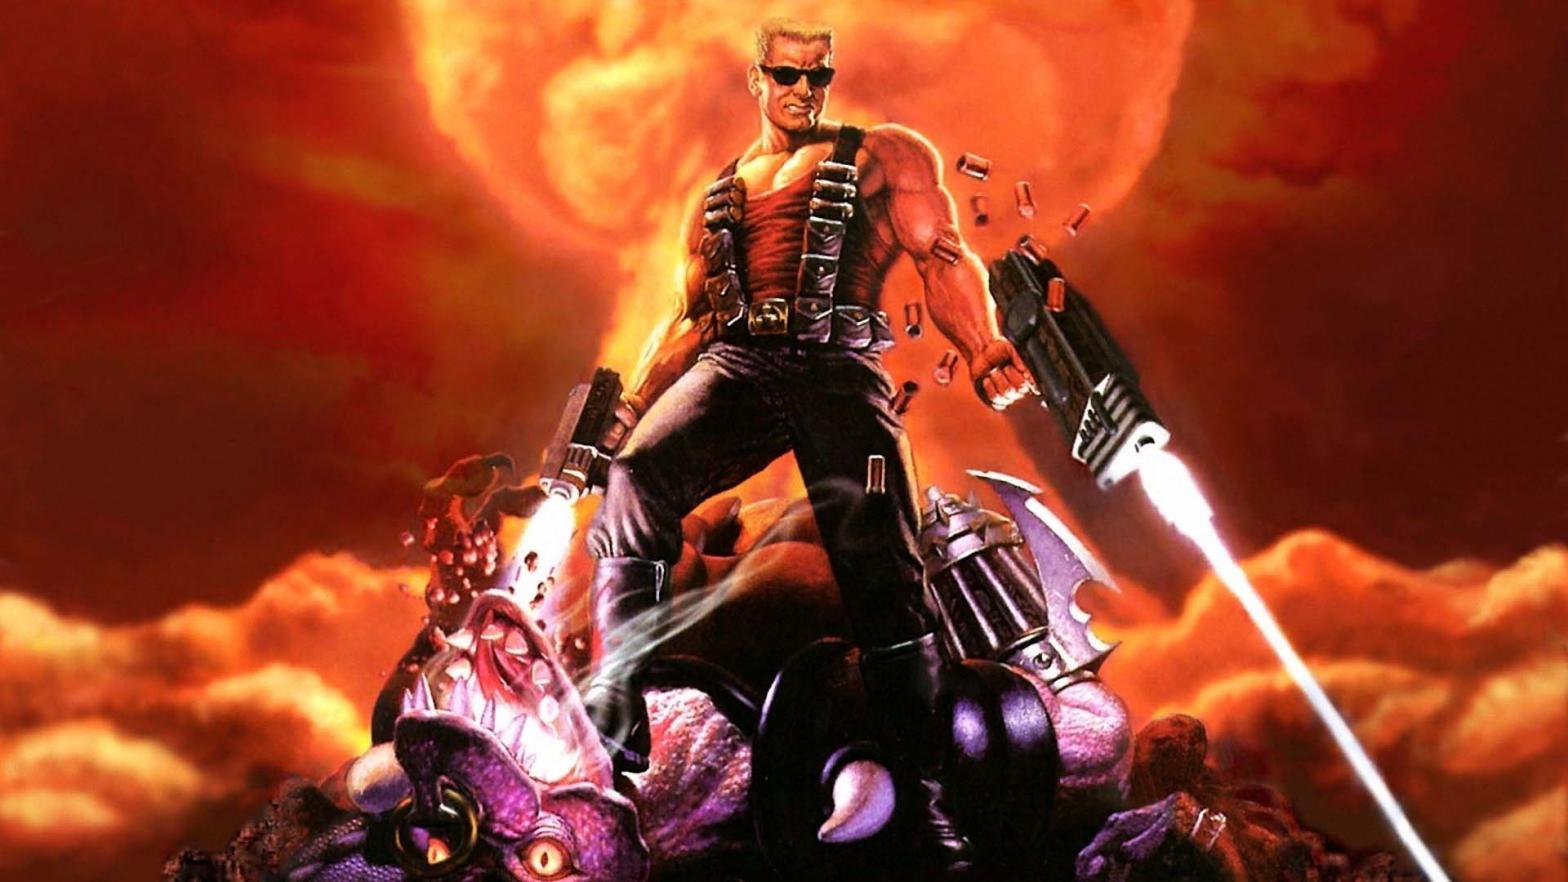 Image: Gearbox / 3D Realms